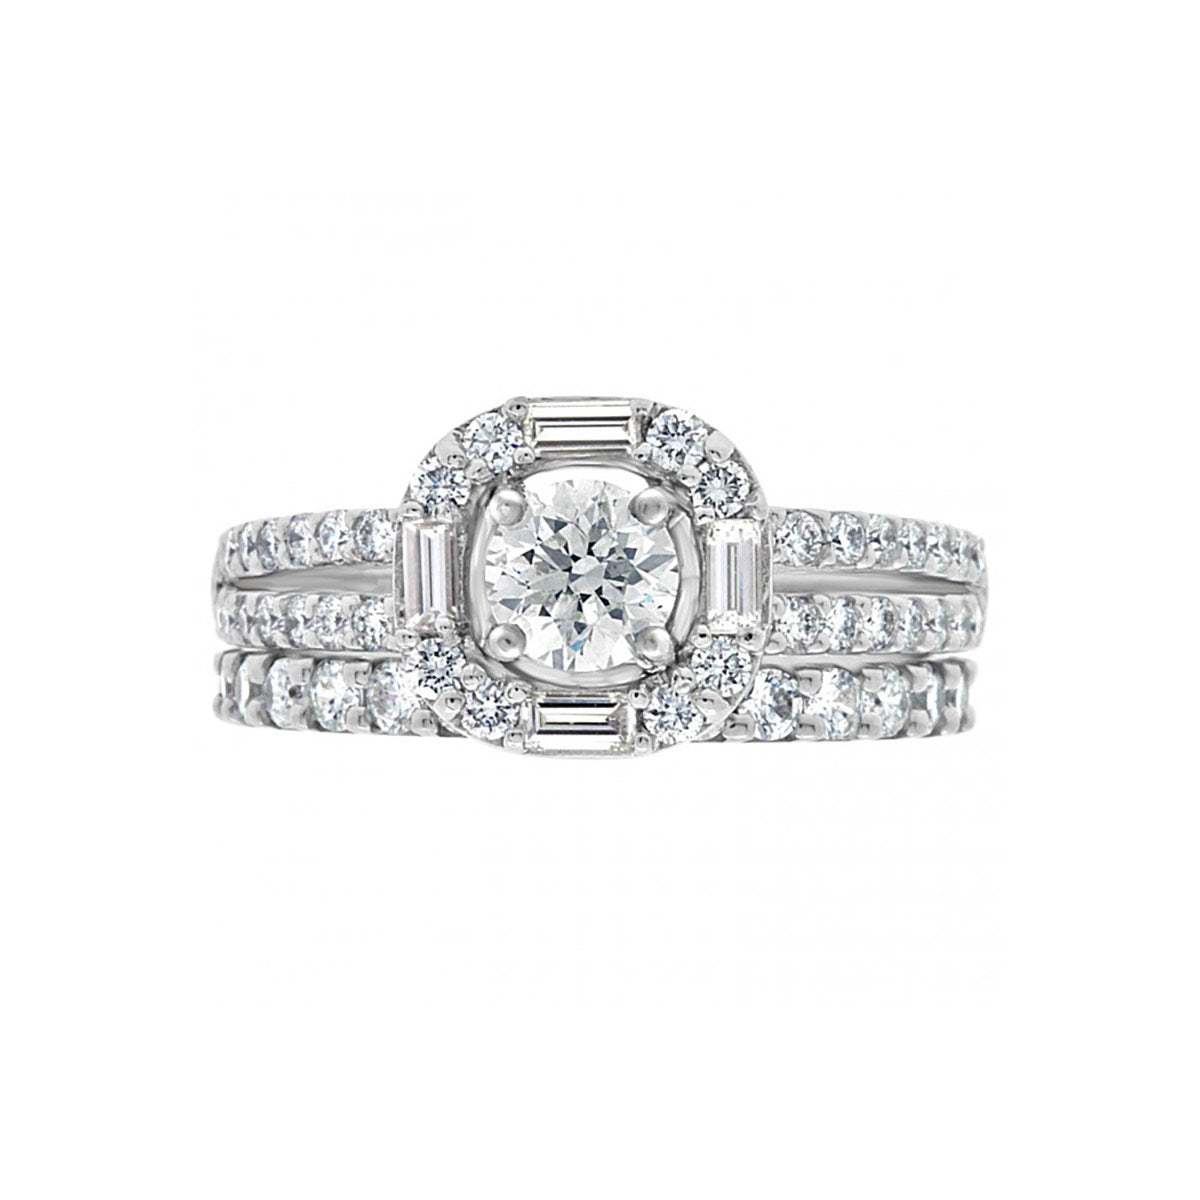 Baguette and Round Diamond Engagement Ring in white gold pictured with a diamond wedding ring